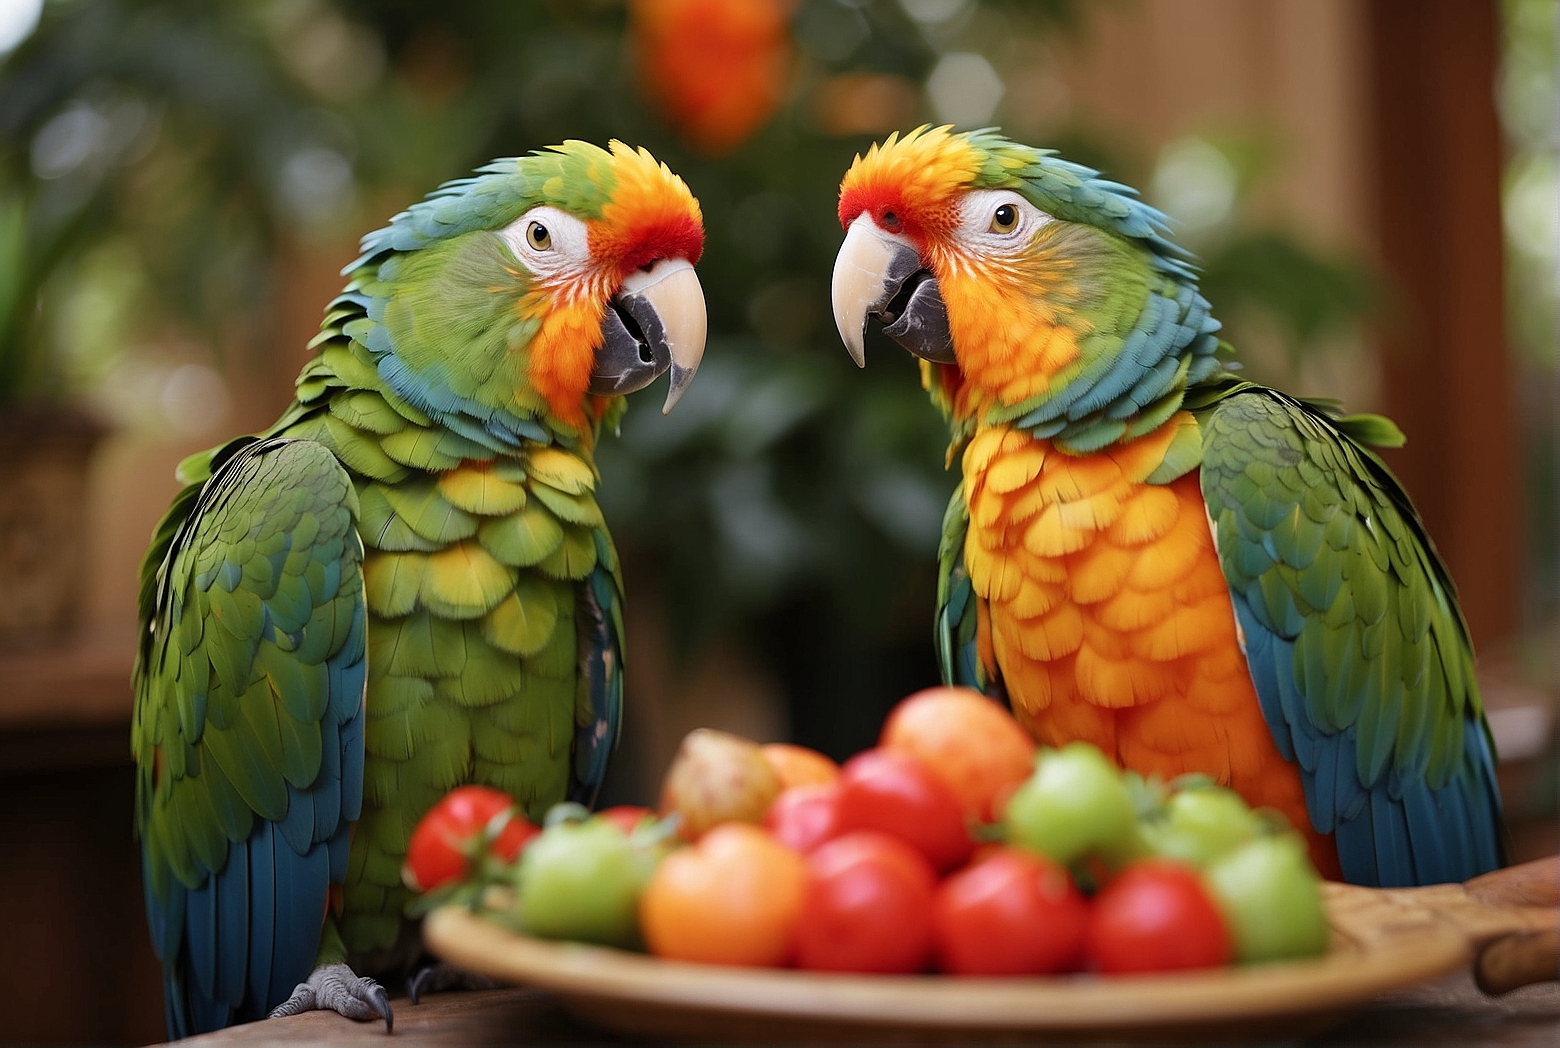 Foods to Avoid Giving Parrots